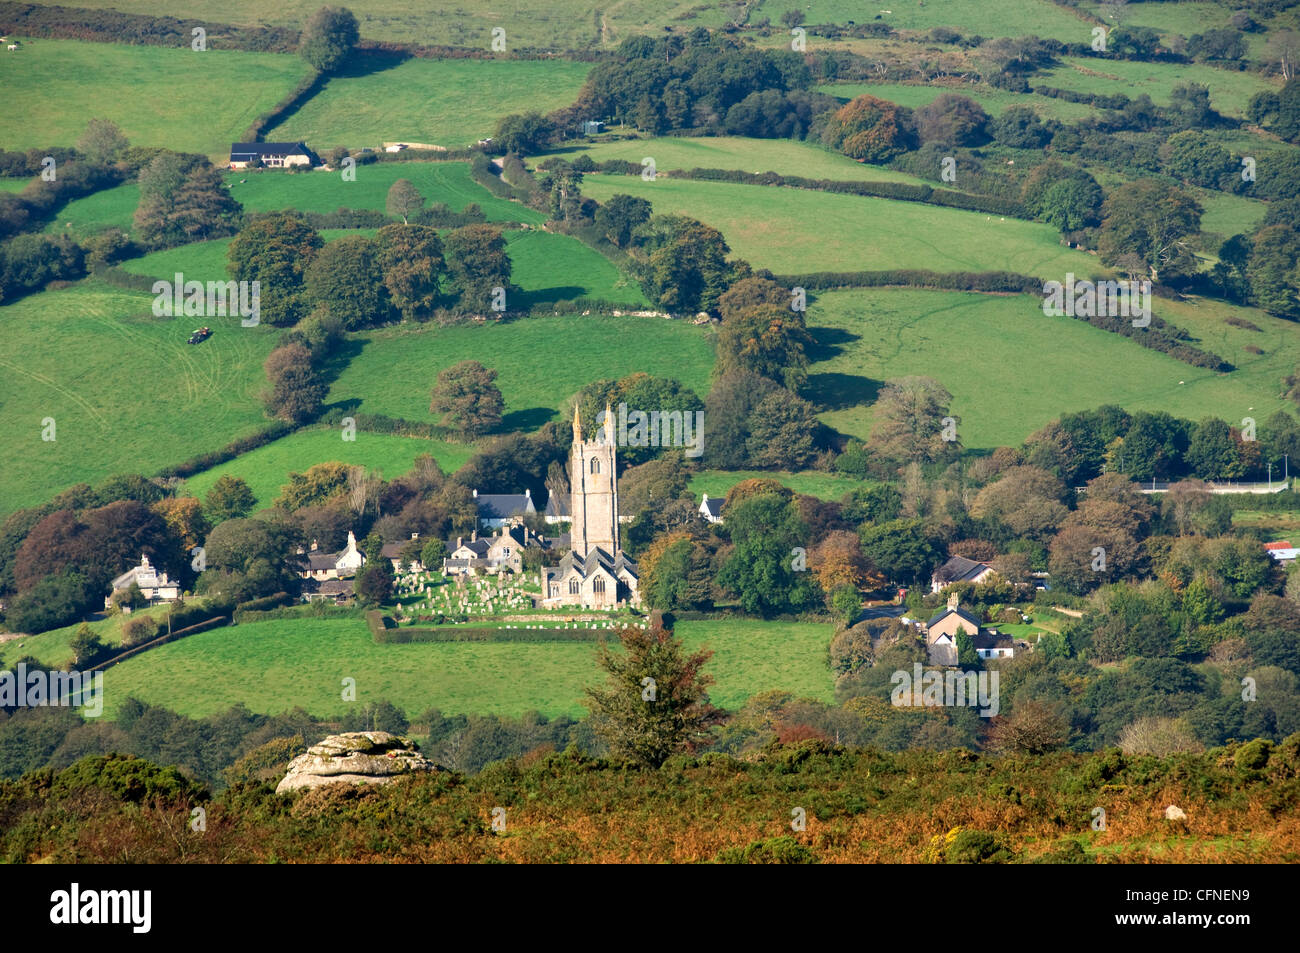 The village of Widecombe in the Moor, Dartmoor National Park, Devon, England, United Kingdom, Europe Stock Photo